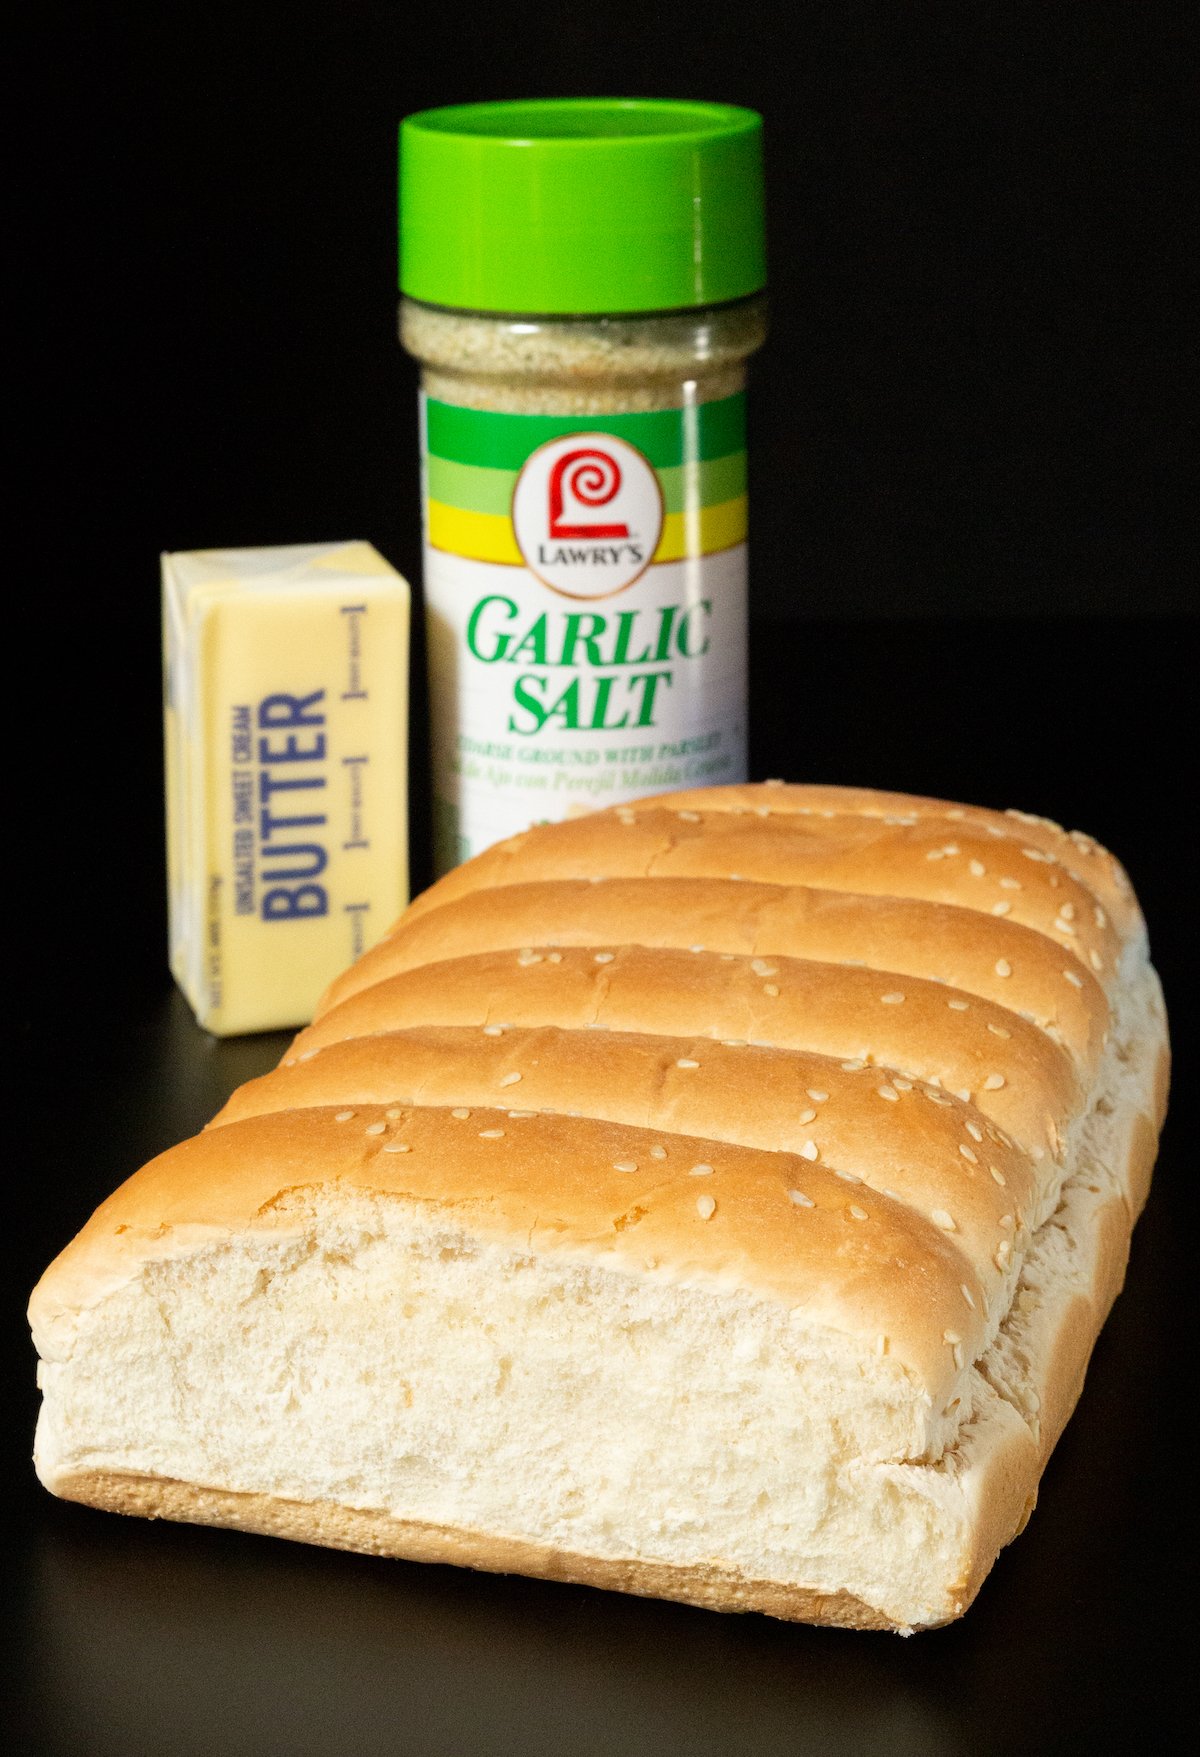 A stick of butter, a container of garlic salt, and a loaf of sesame bbq bread on a black background.